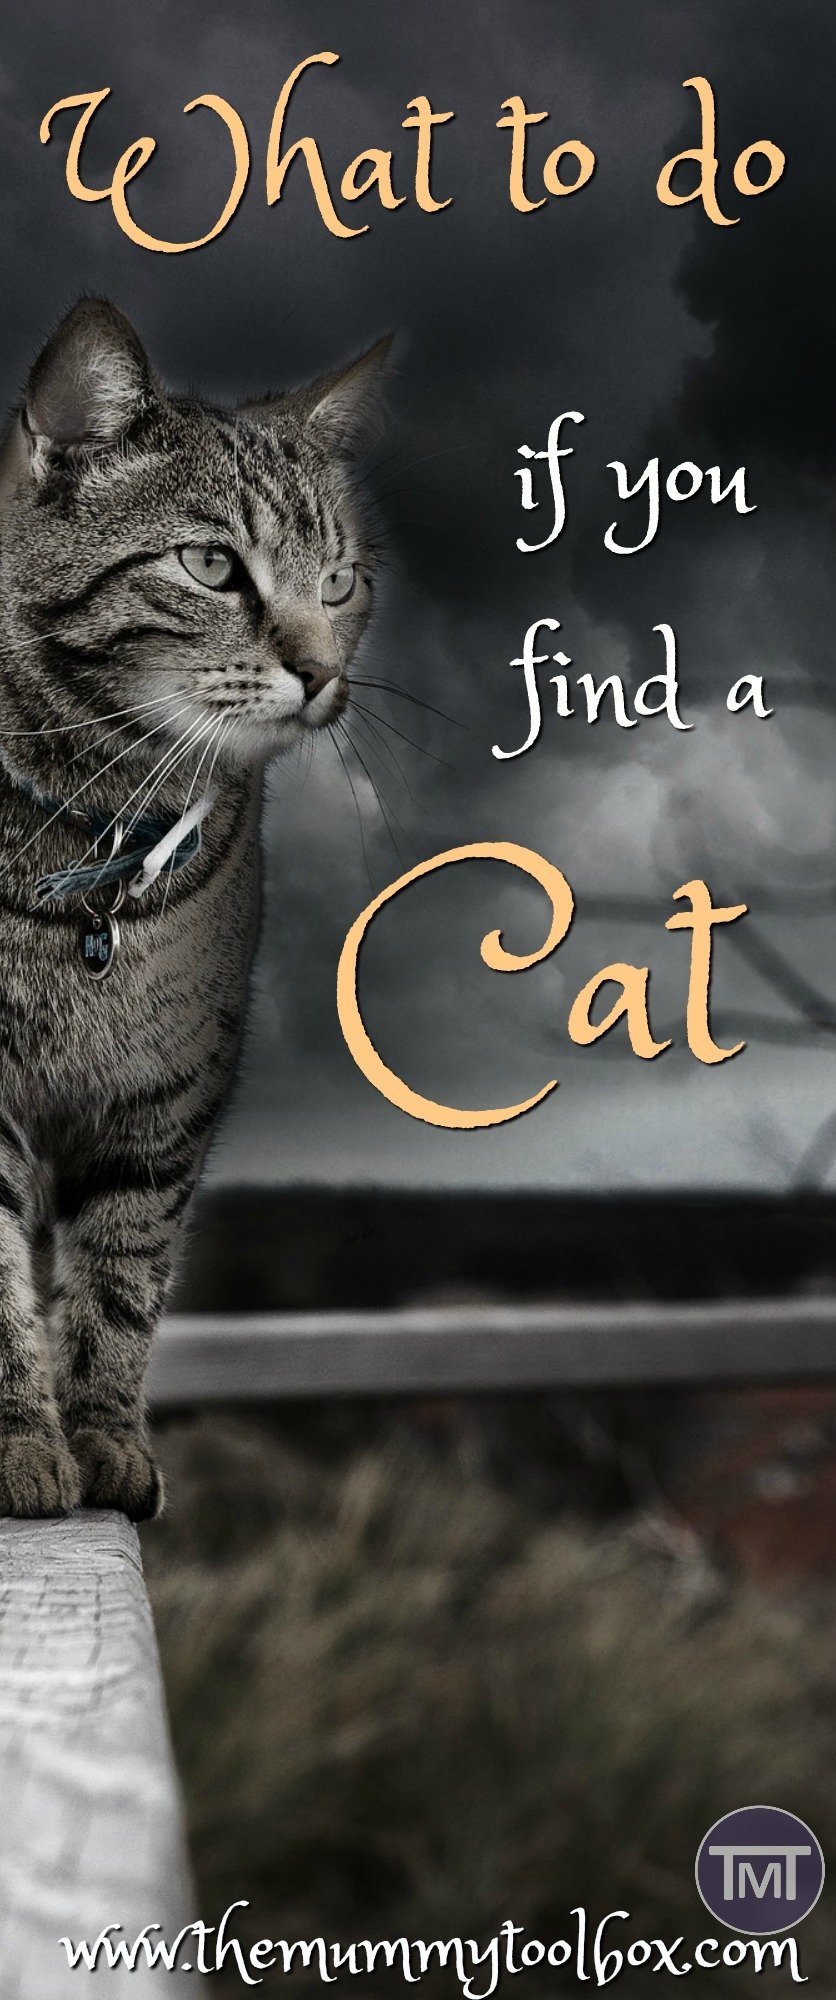 What do you do if you find a cat? how do you know if it has an owner, what if it is injured and who do you call? All the answers and more!